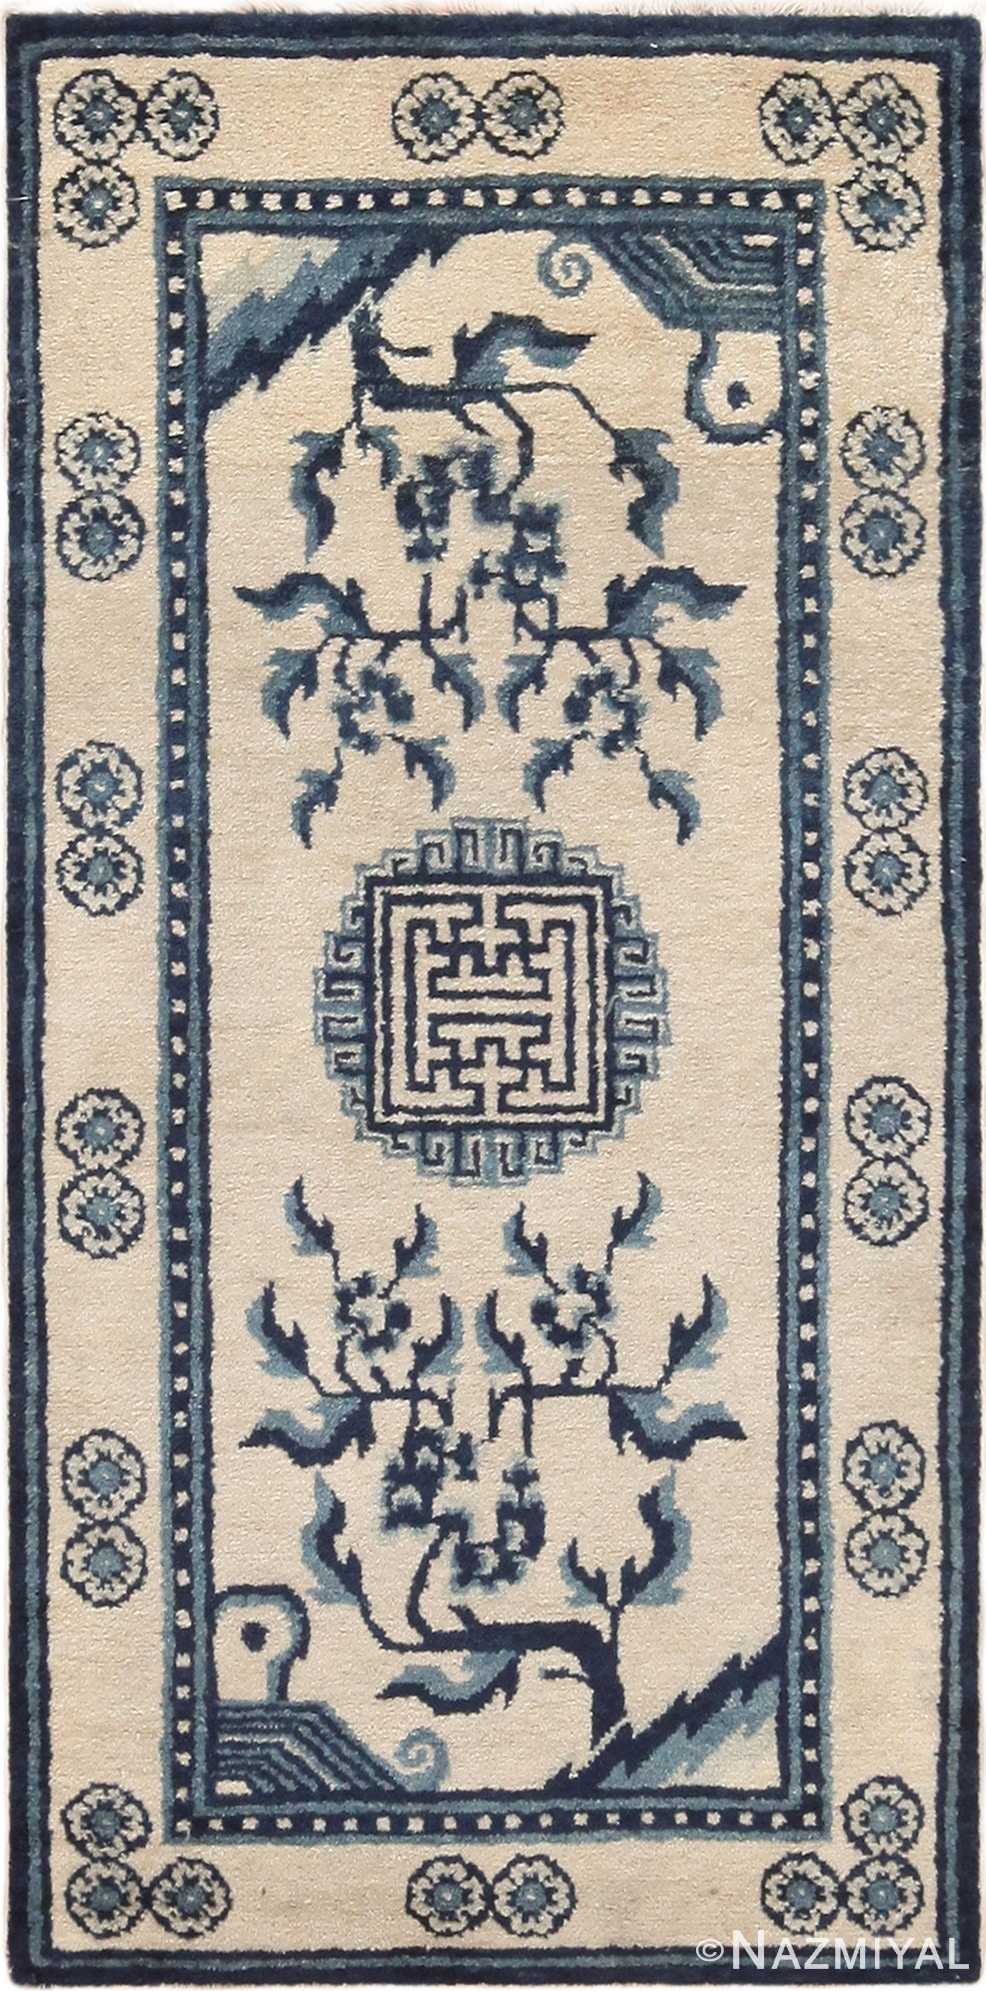 Ivory Background Antique Chinese Rug 72061 by Nazmiyal Antique Rugs